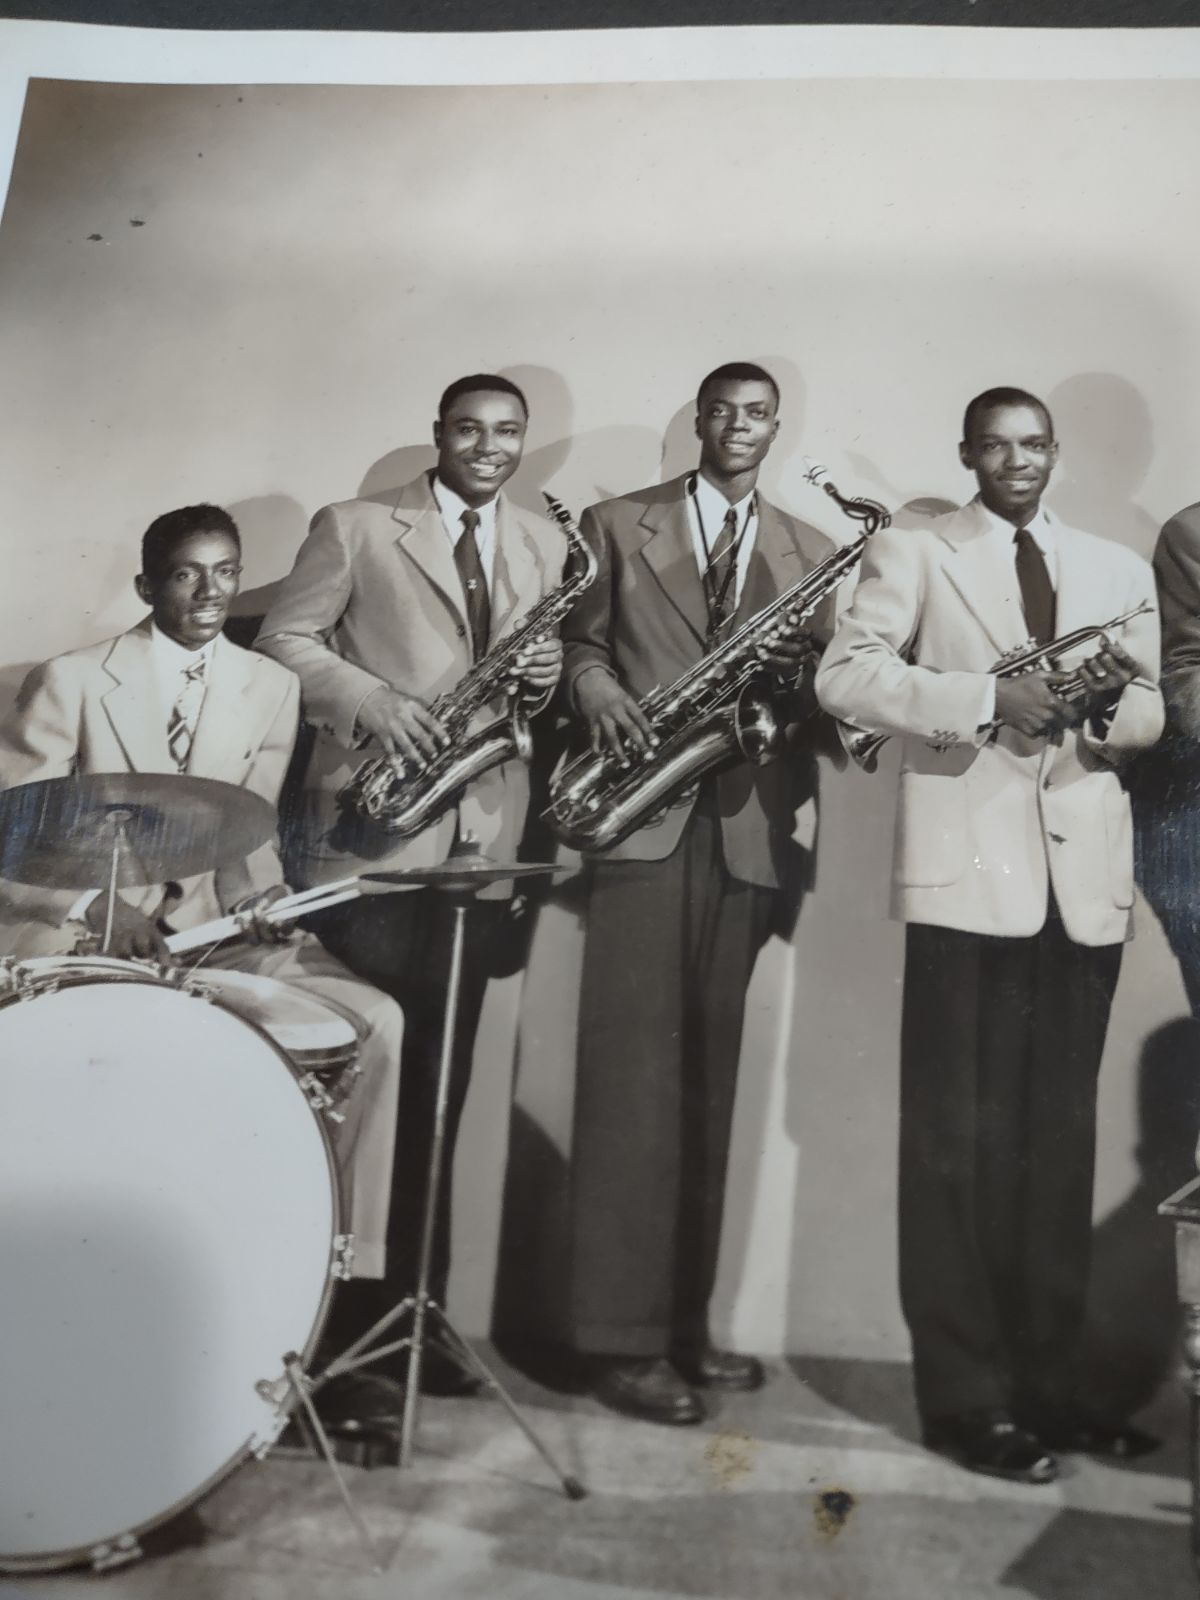 Grandpa with other band members, 2nd from the left.